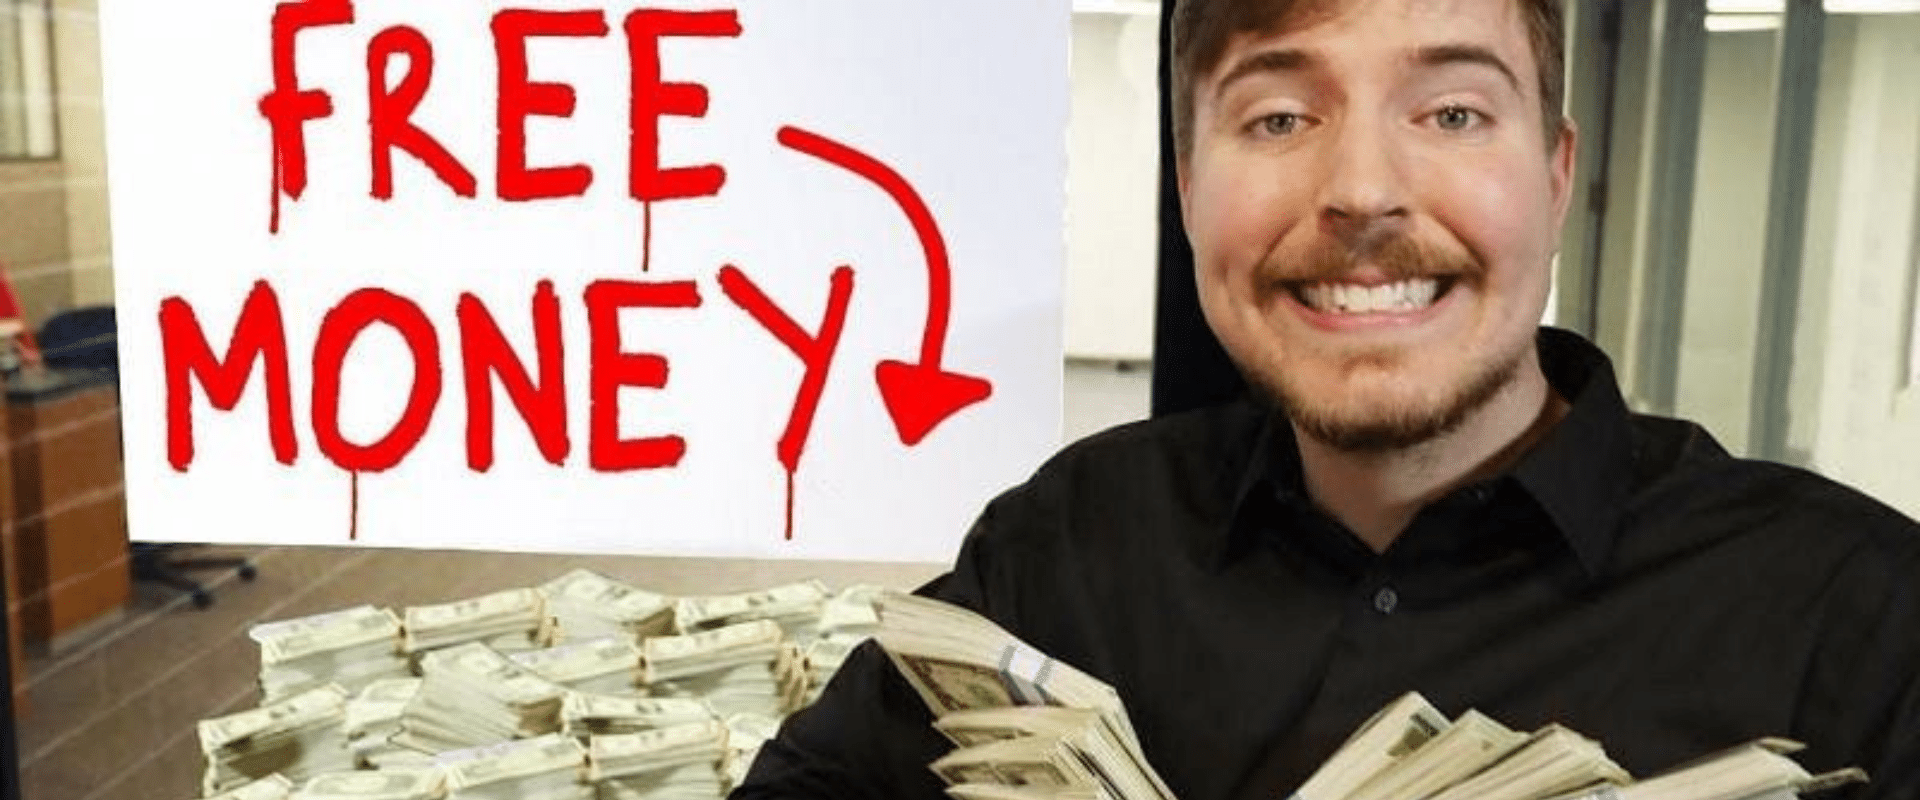 A man holding a sign that says free money.